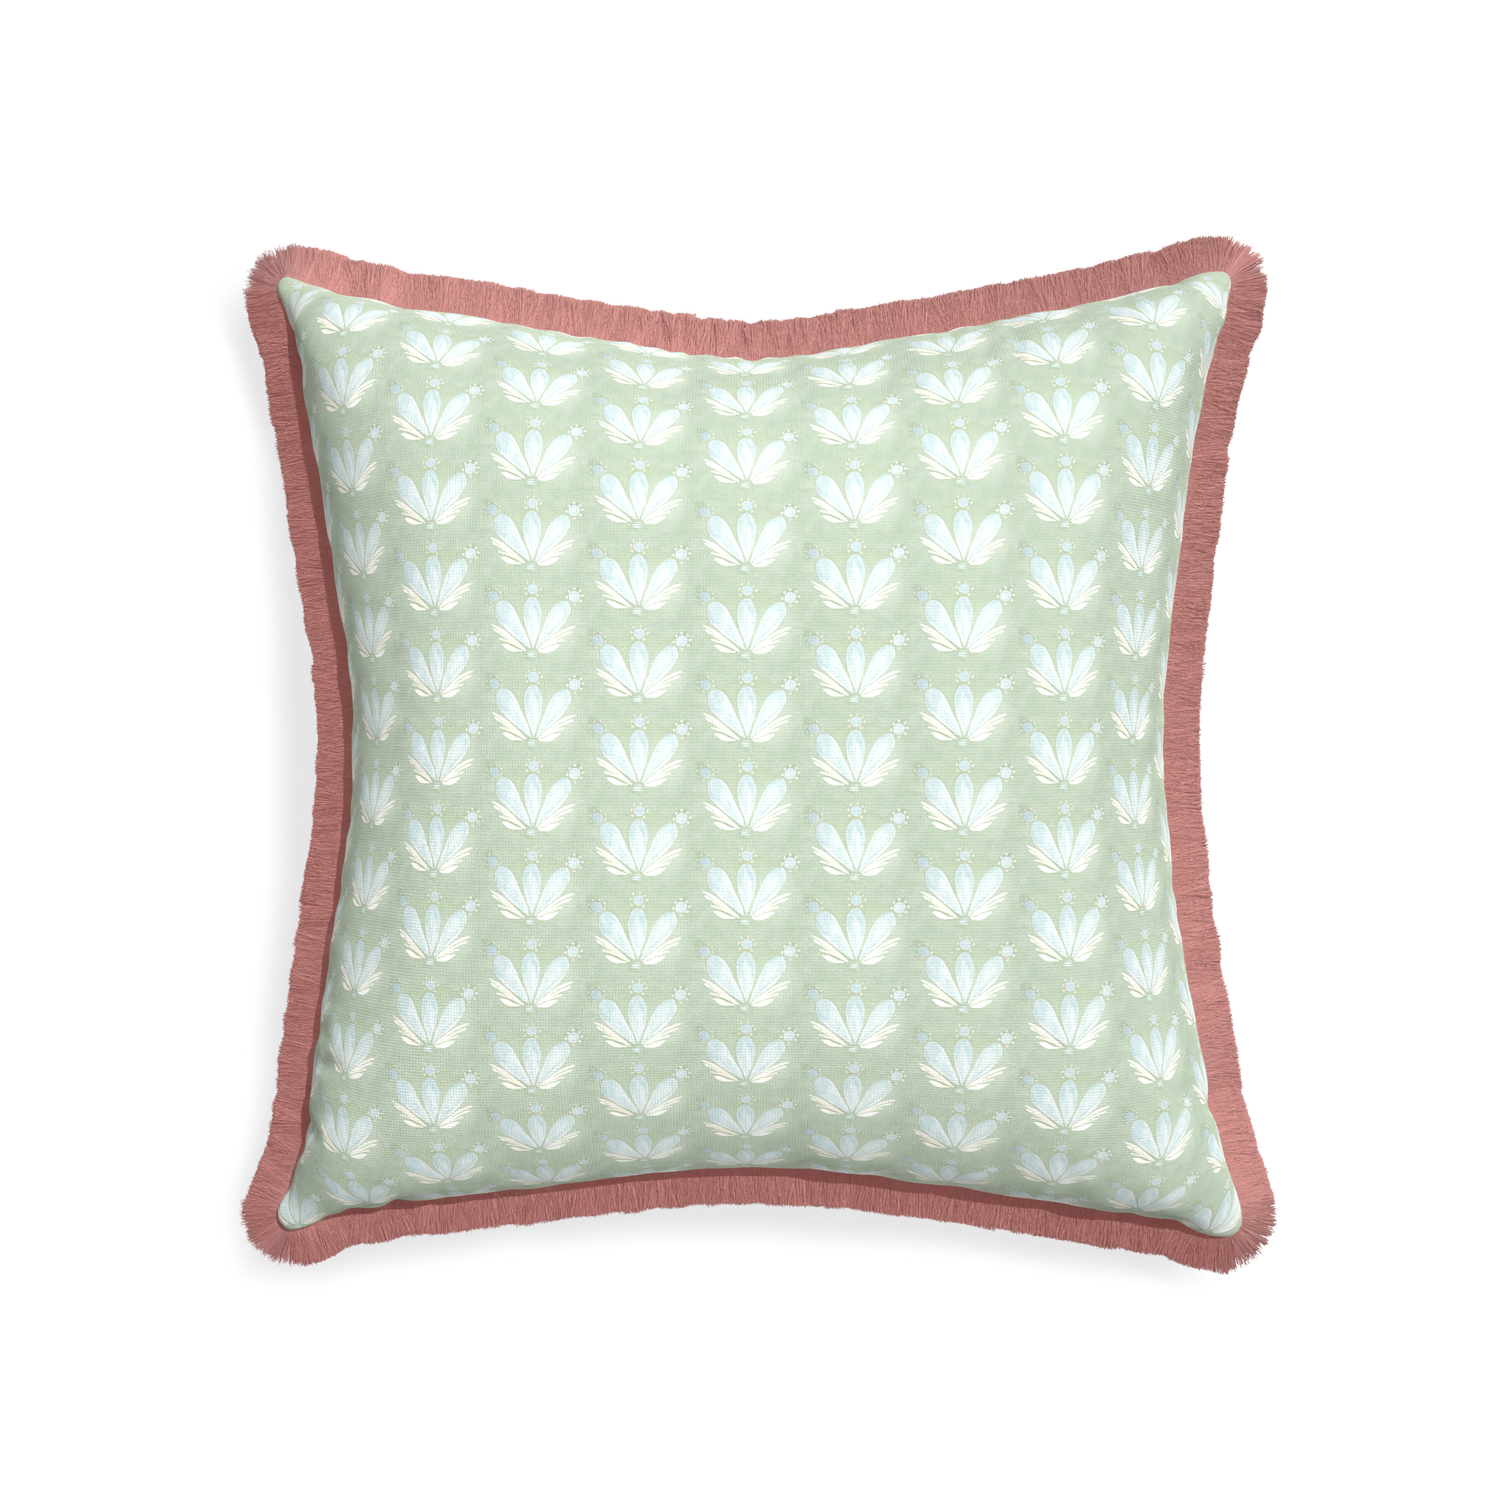 22-square serena sea salt custom blue & green floral drop repeatpillow with d fringe on white background